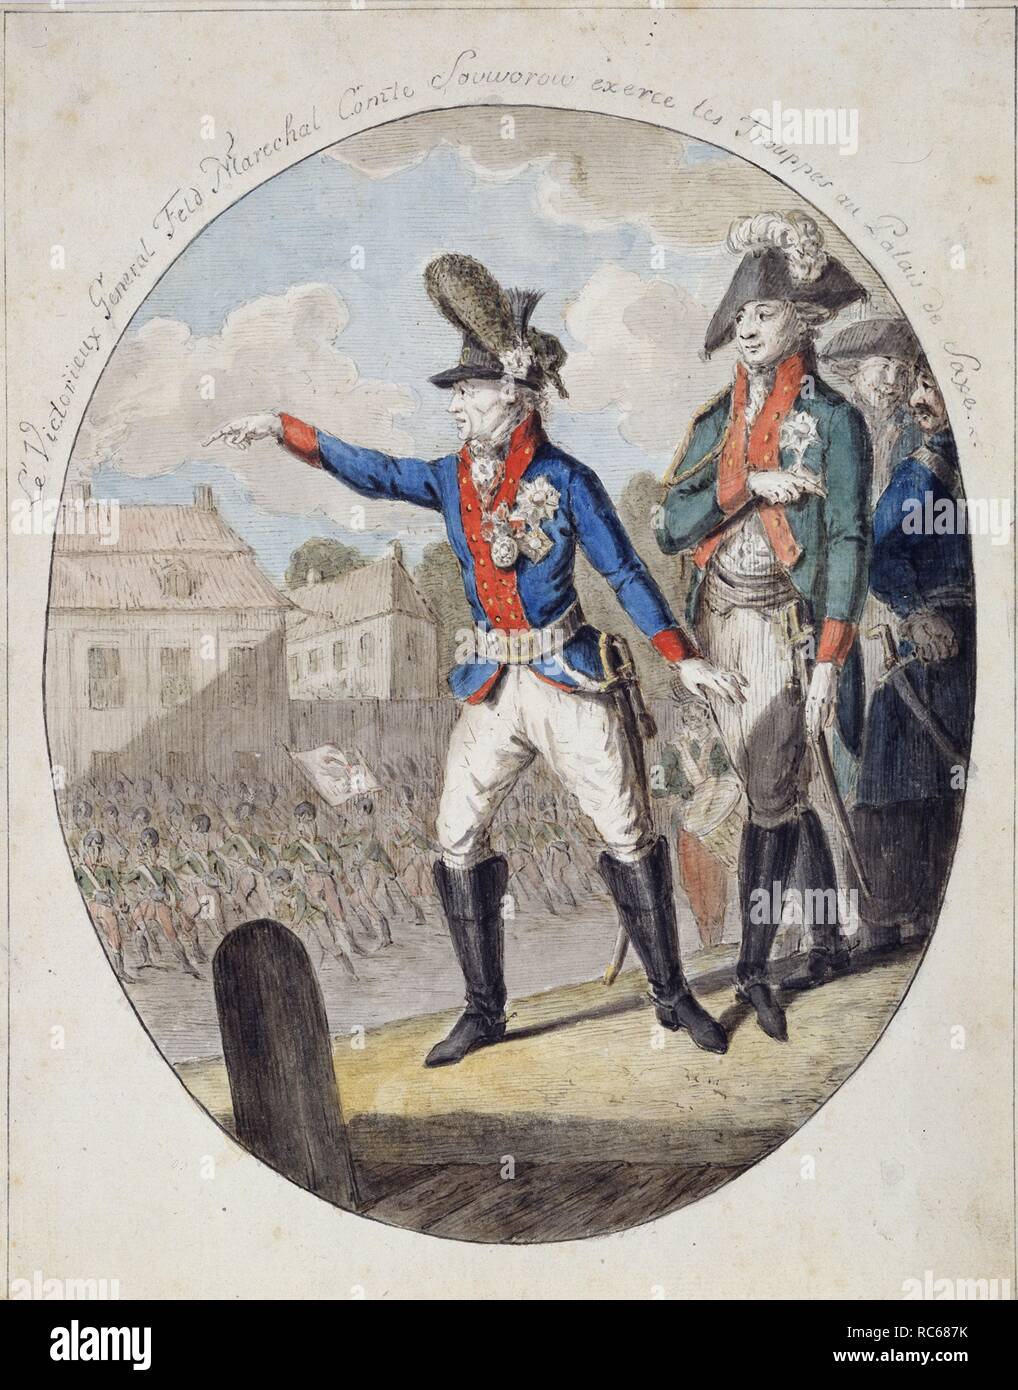 Field Marshal A. Suvorov inspecting the troops before the Elector of Saxony Palace in Warsaw in 1794. Museum: State A. Pushkin Museum of Fine Arts, Moscow. Author: ANONYMOUS. Stock Photo